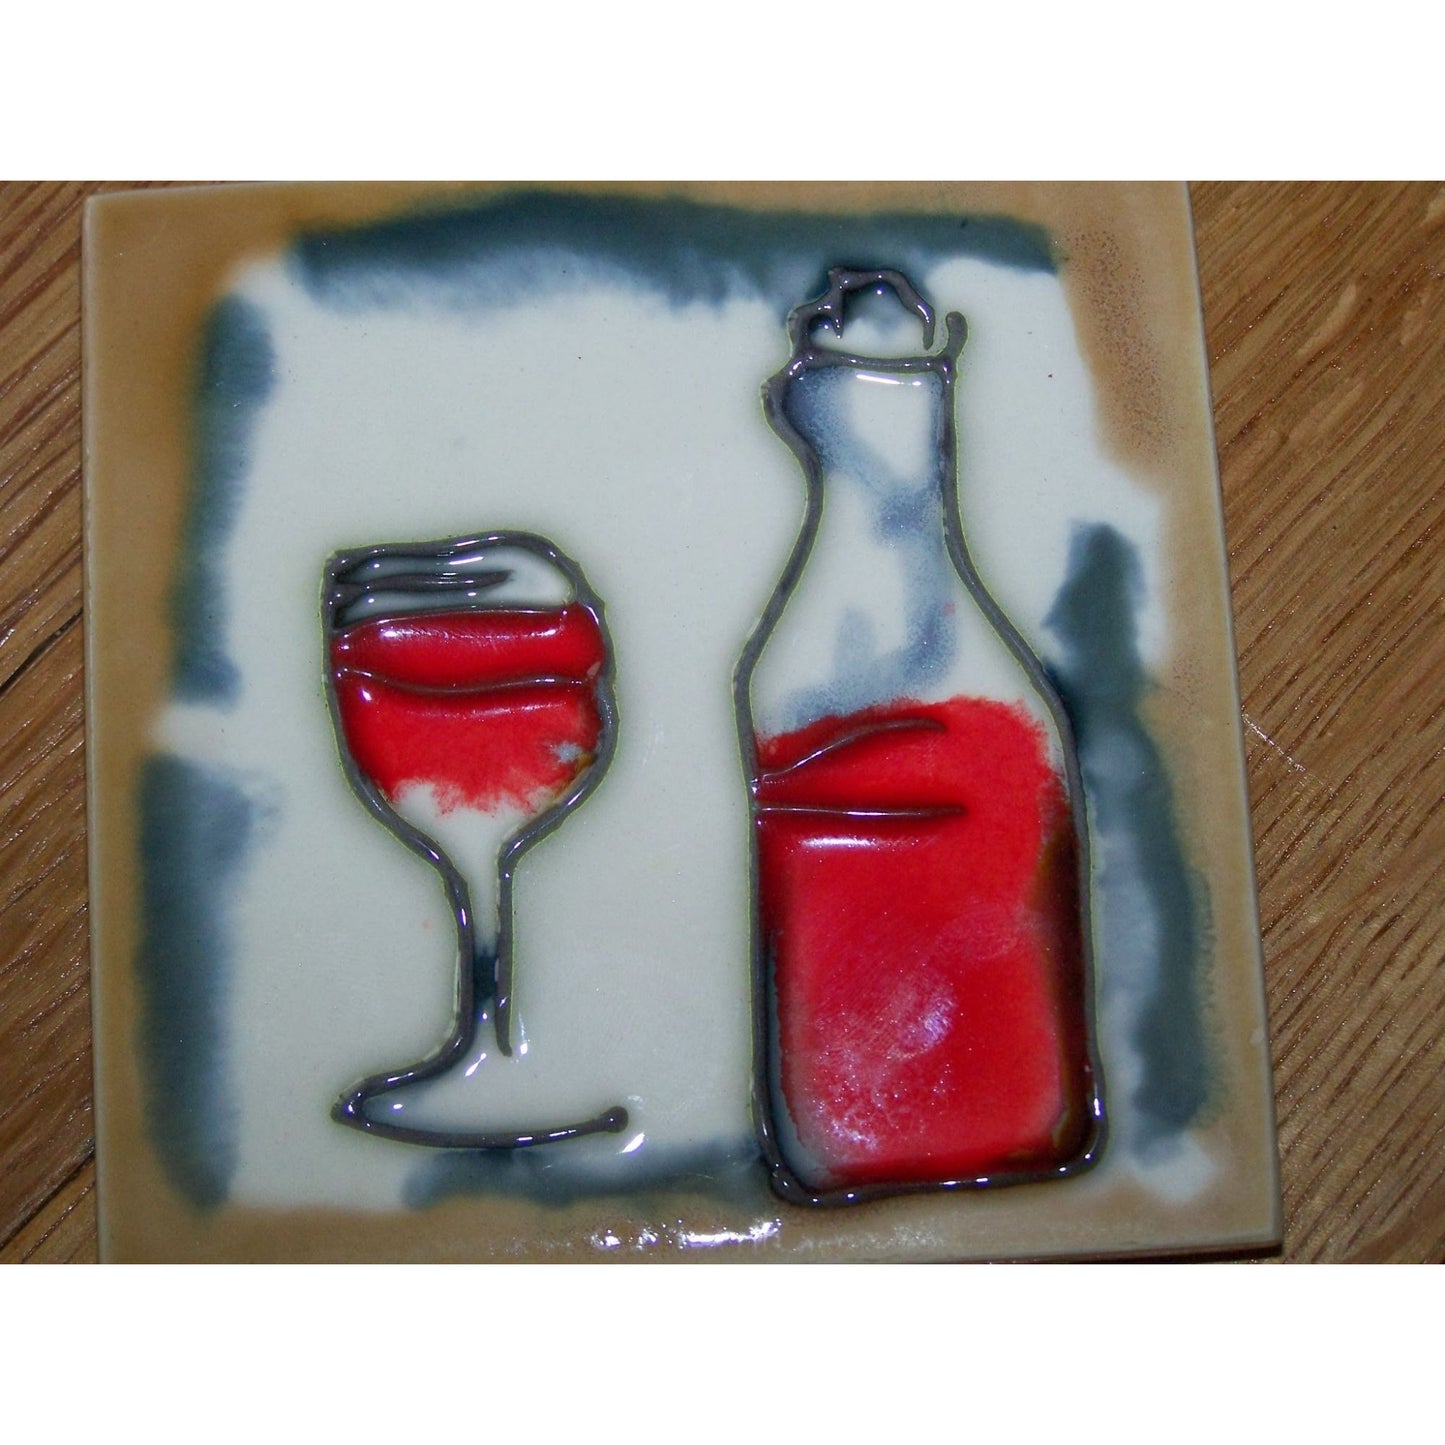 Art Tile 4" x 4" Muddy Waters Hand Painted 7A070 ArtWork on Tile Wine 5 Wine Glass and Bottle 1/2 " Ceramic Tile and backing